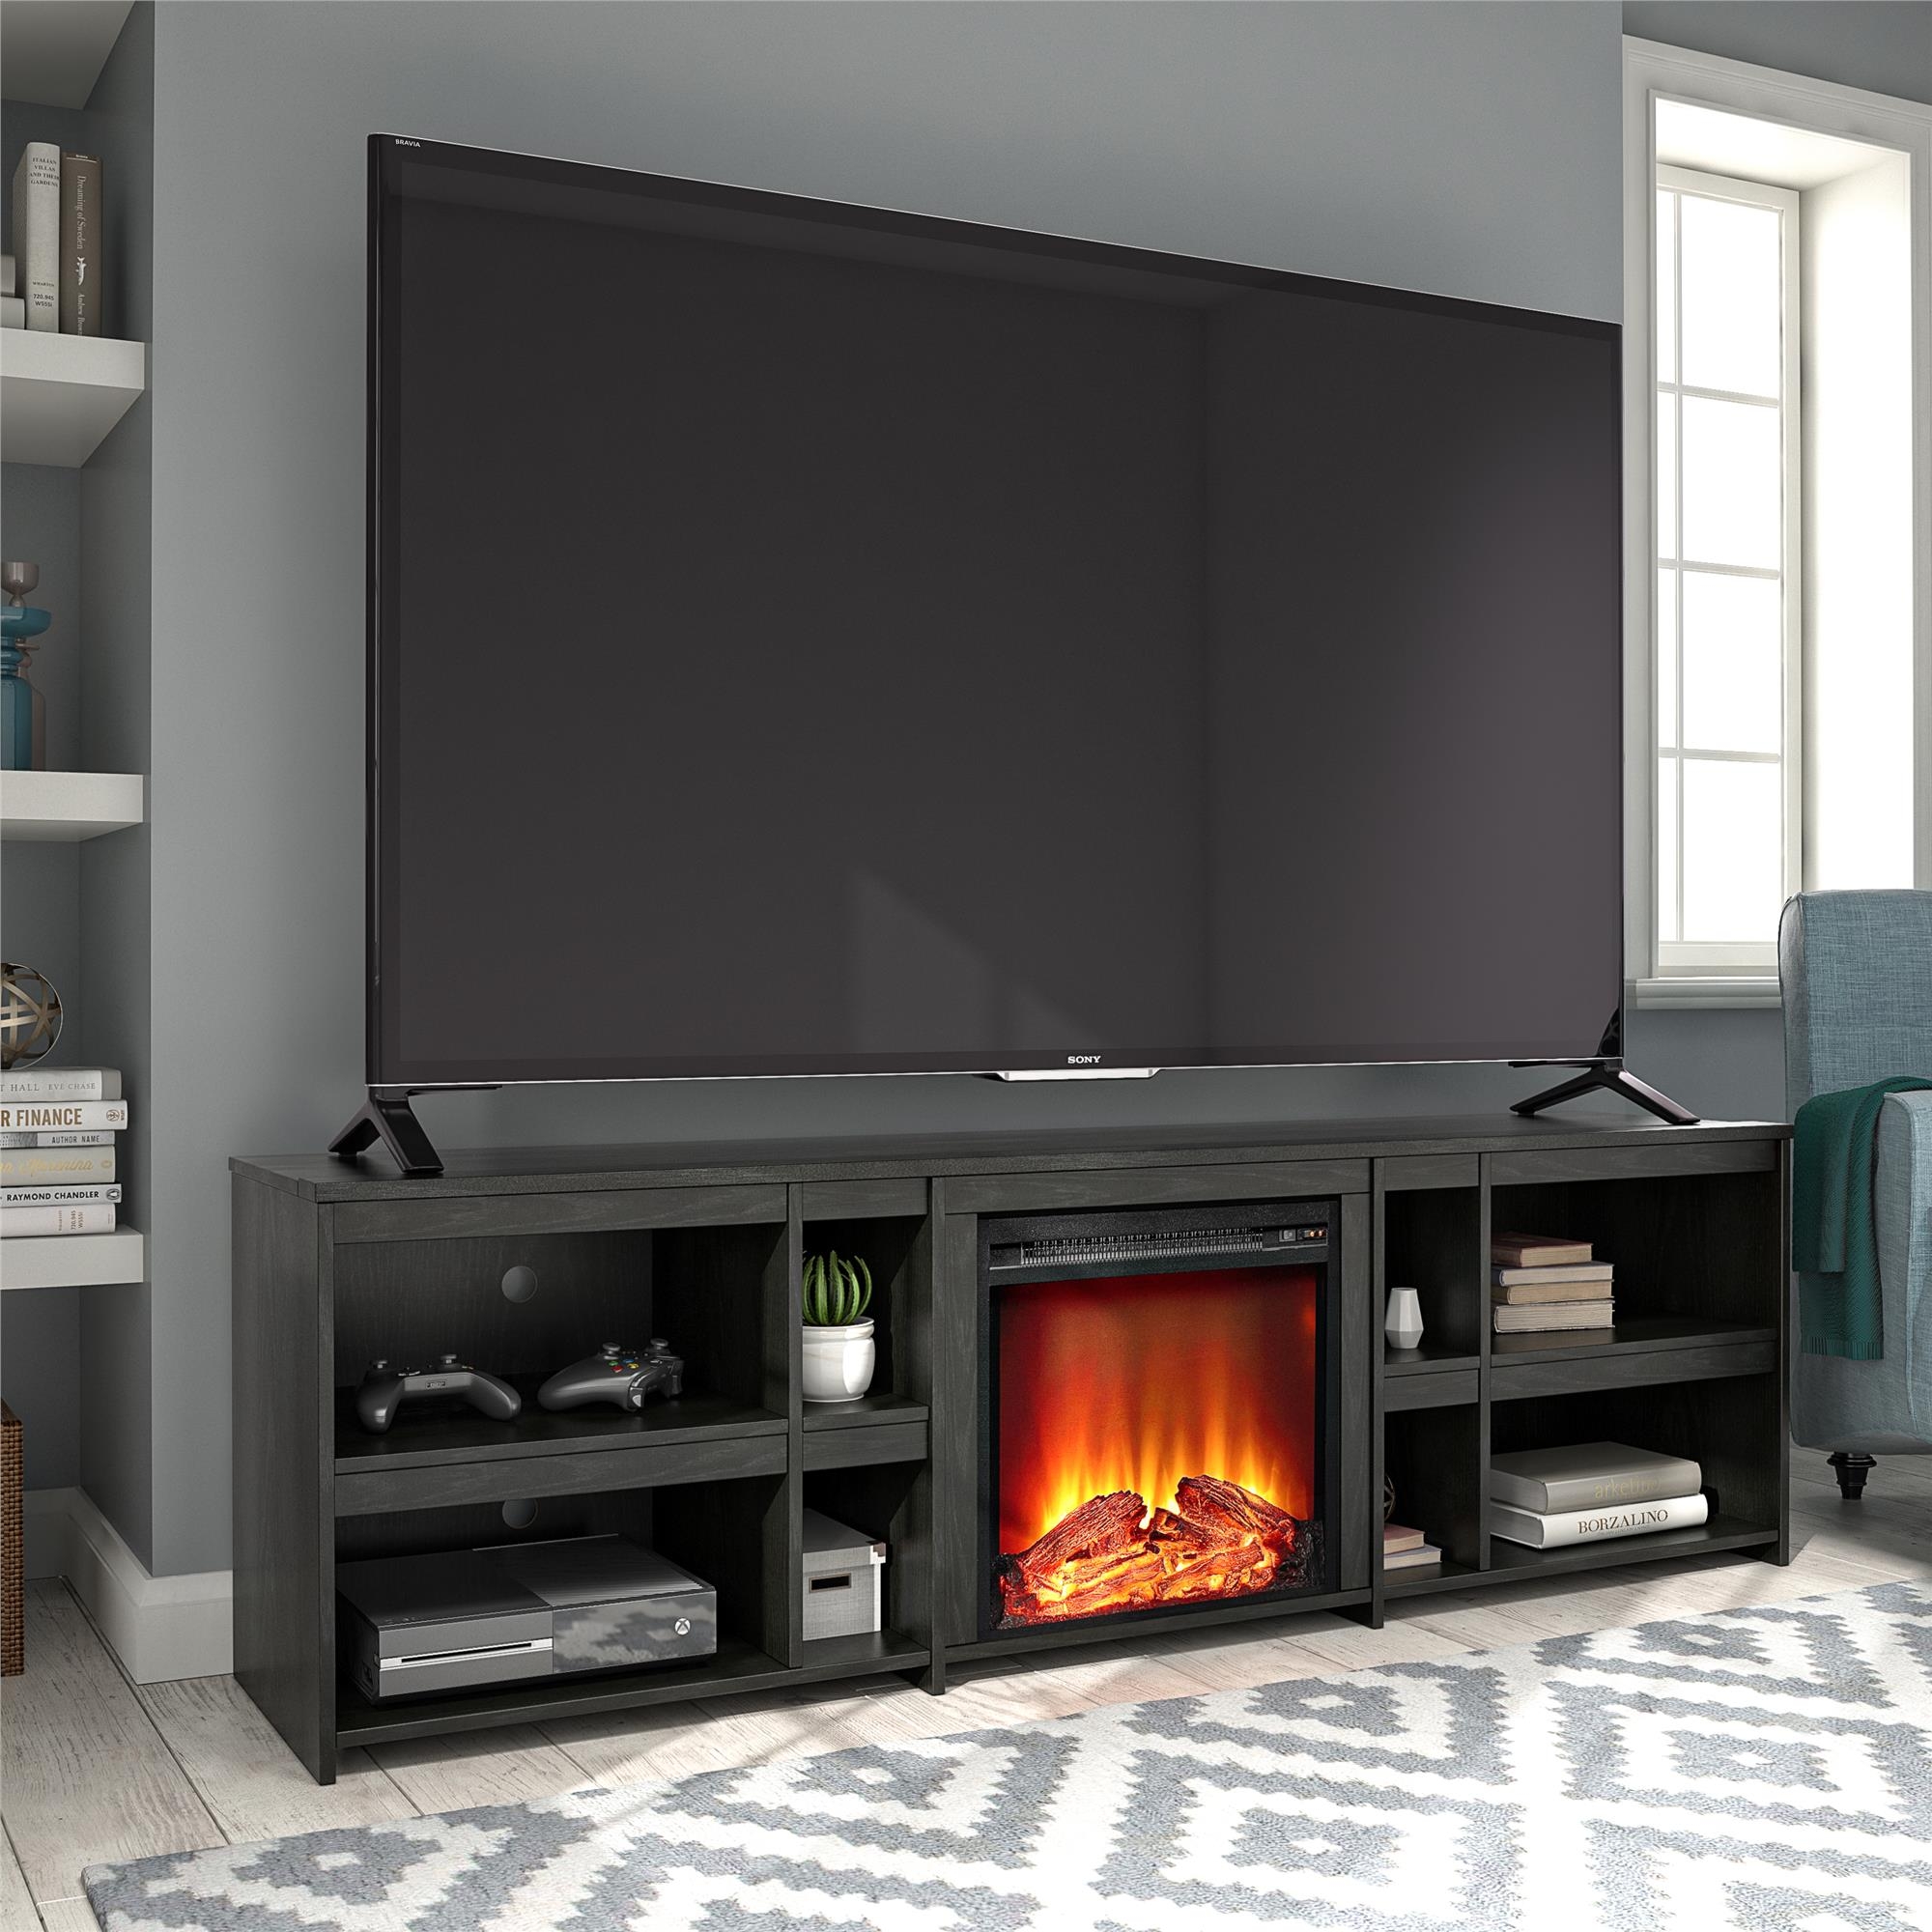 Duro TV Stand for TVs up to 85" with Fireplace Included